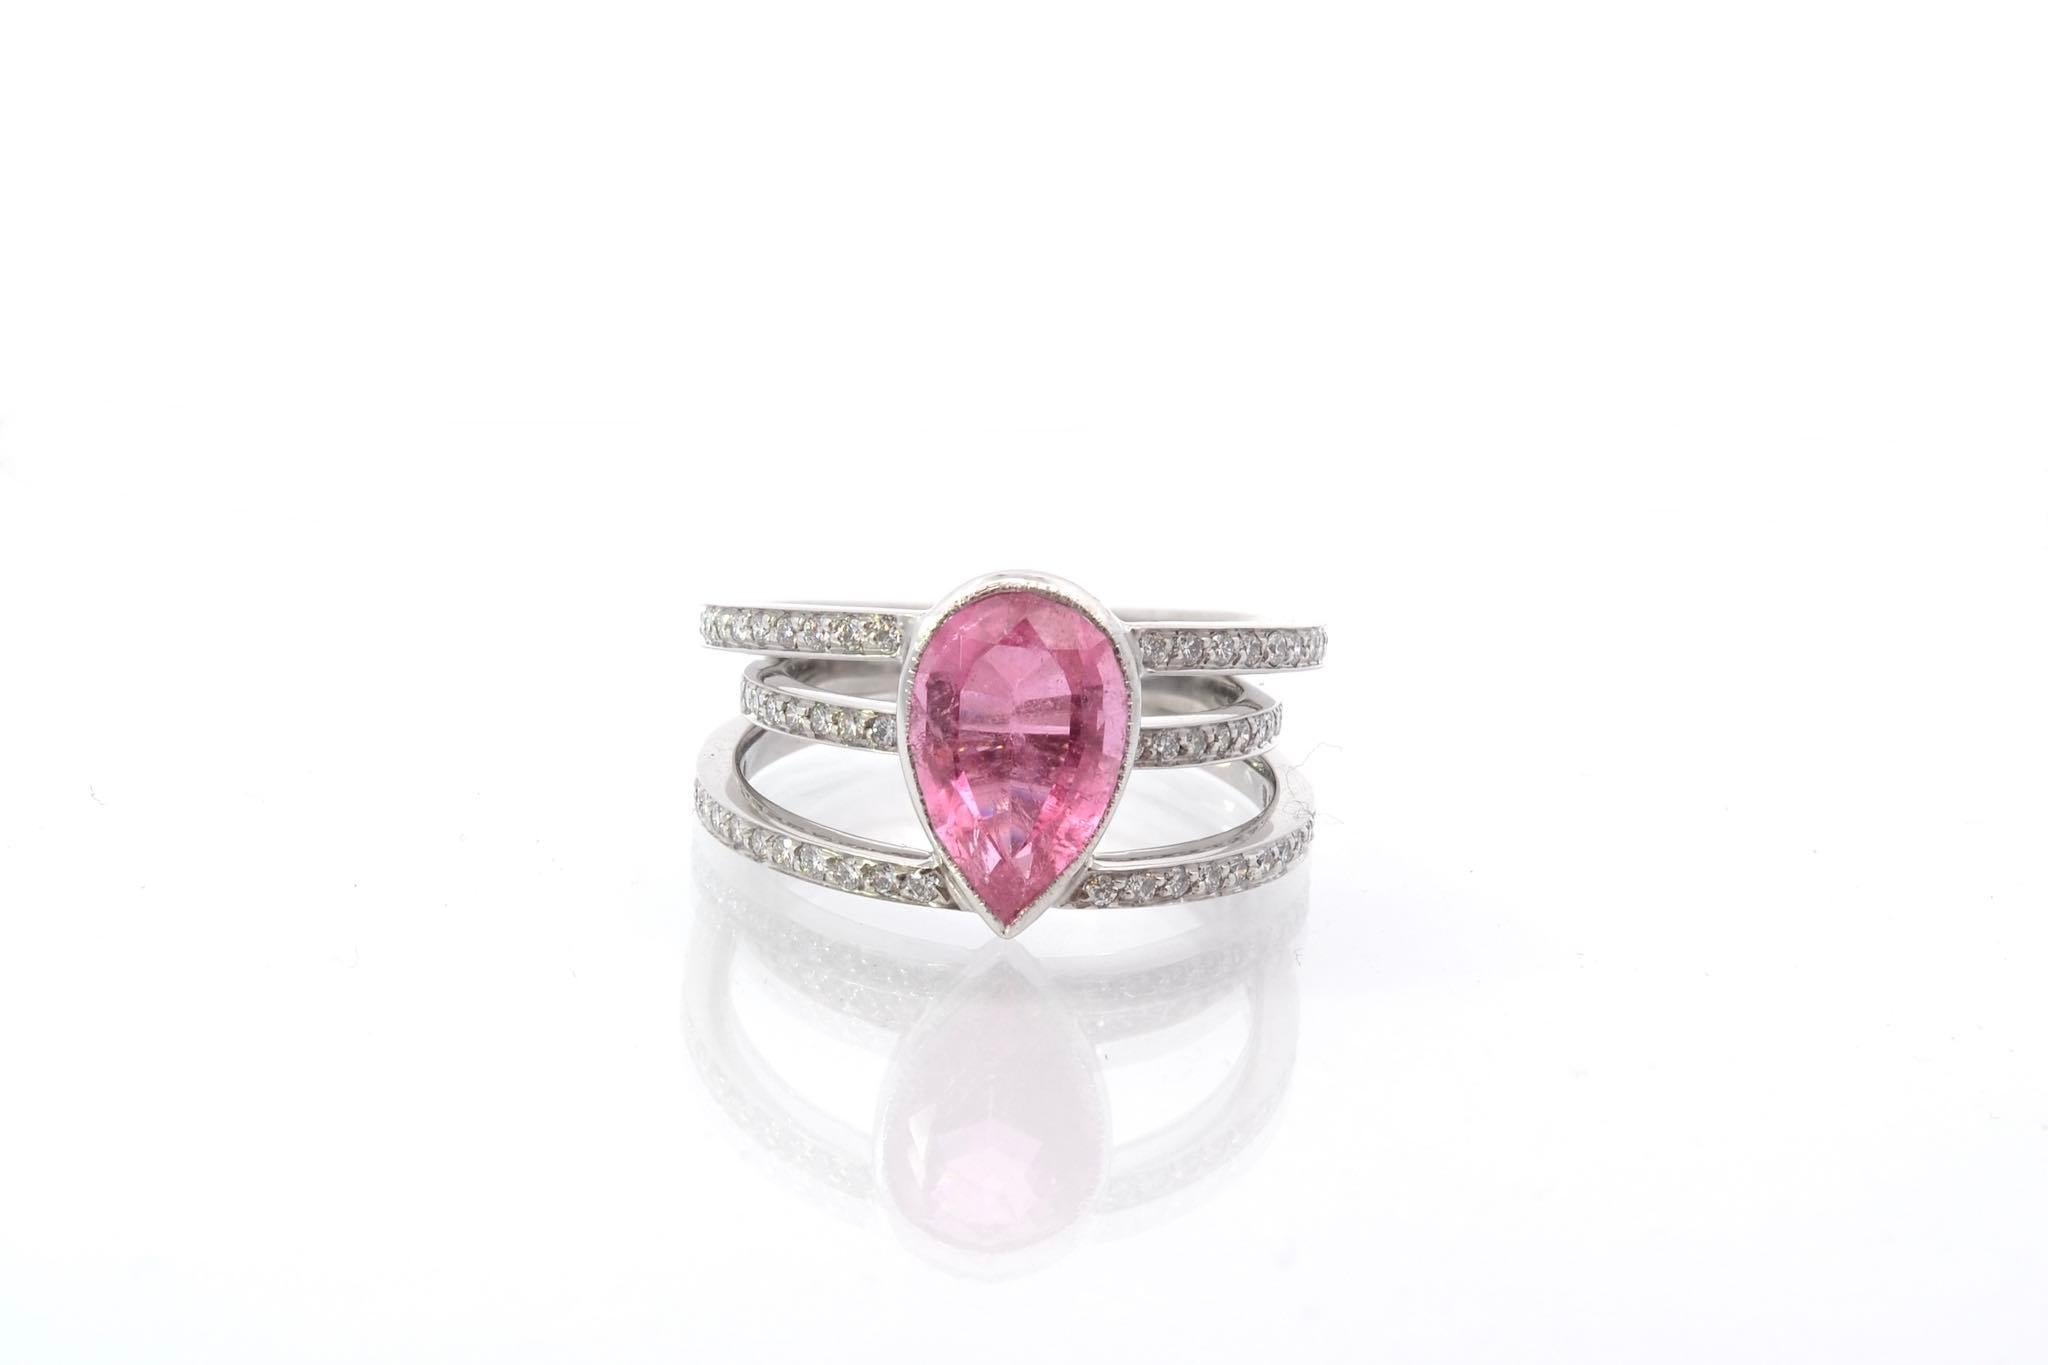 Stones: Tourmaline of 4.02 cts and diamond surround of 0.45 ct
Material: 18k white gold
Dimensions: 1.5cm
Weight: 9.7g
Period: Recent vintage style
Size: 53 (free sizing)
Certificate
Ref. : 25526